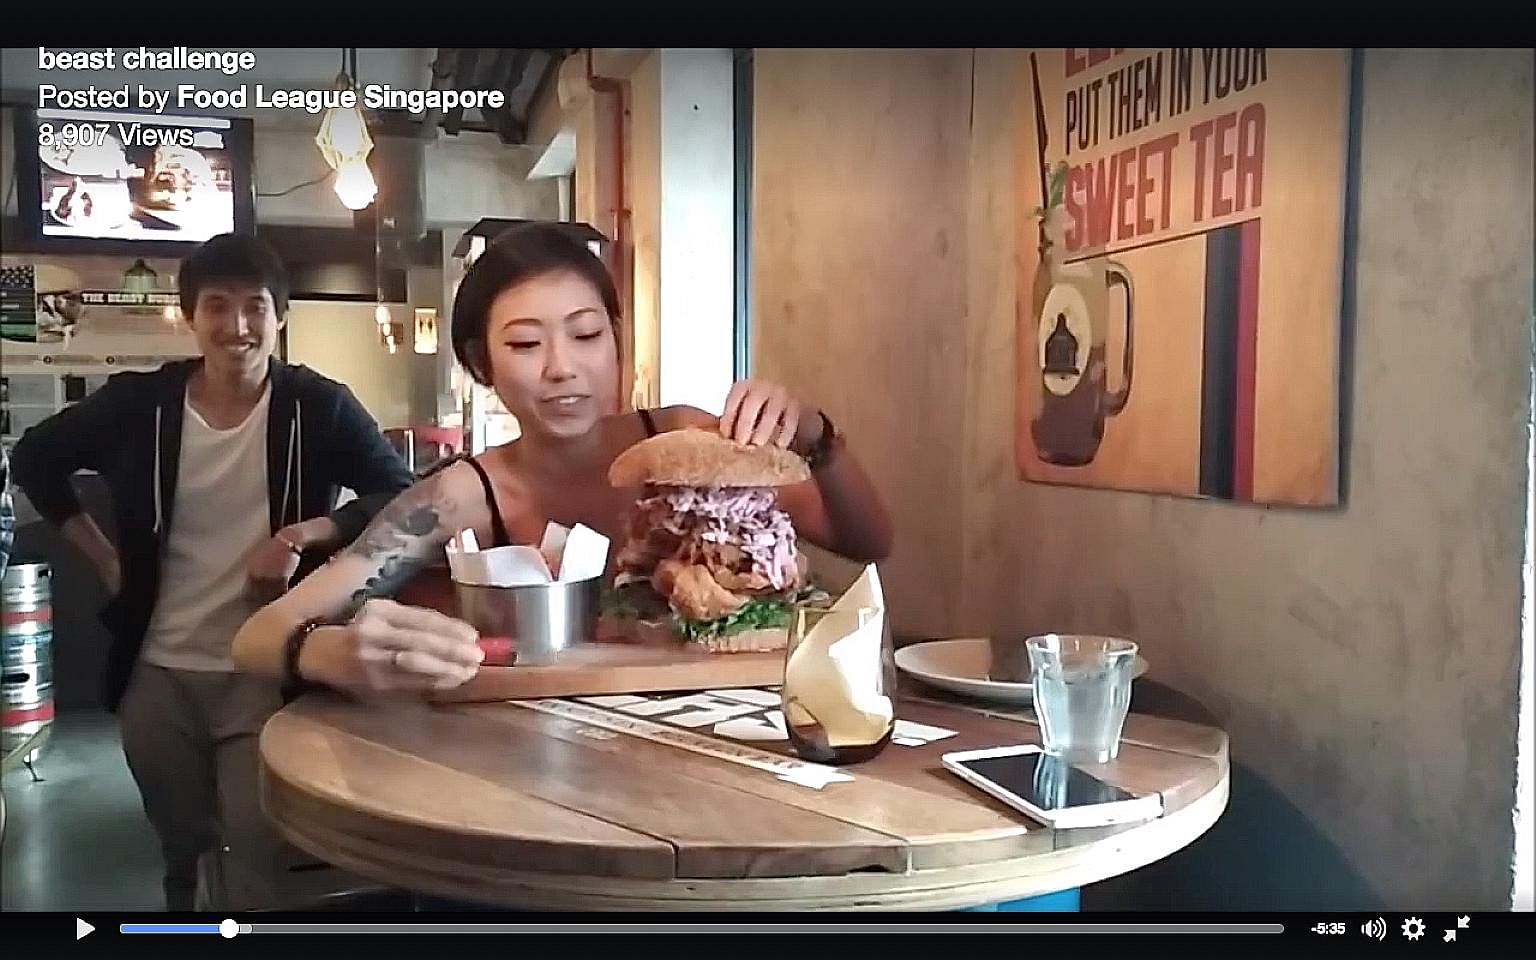 Competitive eater Thomasina Ow with the 3.2kg burger she demolished in 43 minutes last Wednesday. Ms Bermudez's path from maid to businesswoman with 15 workers is an inspiring story shared by Facebook group SamaSama, which seeks to improve the lives 